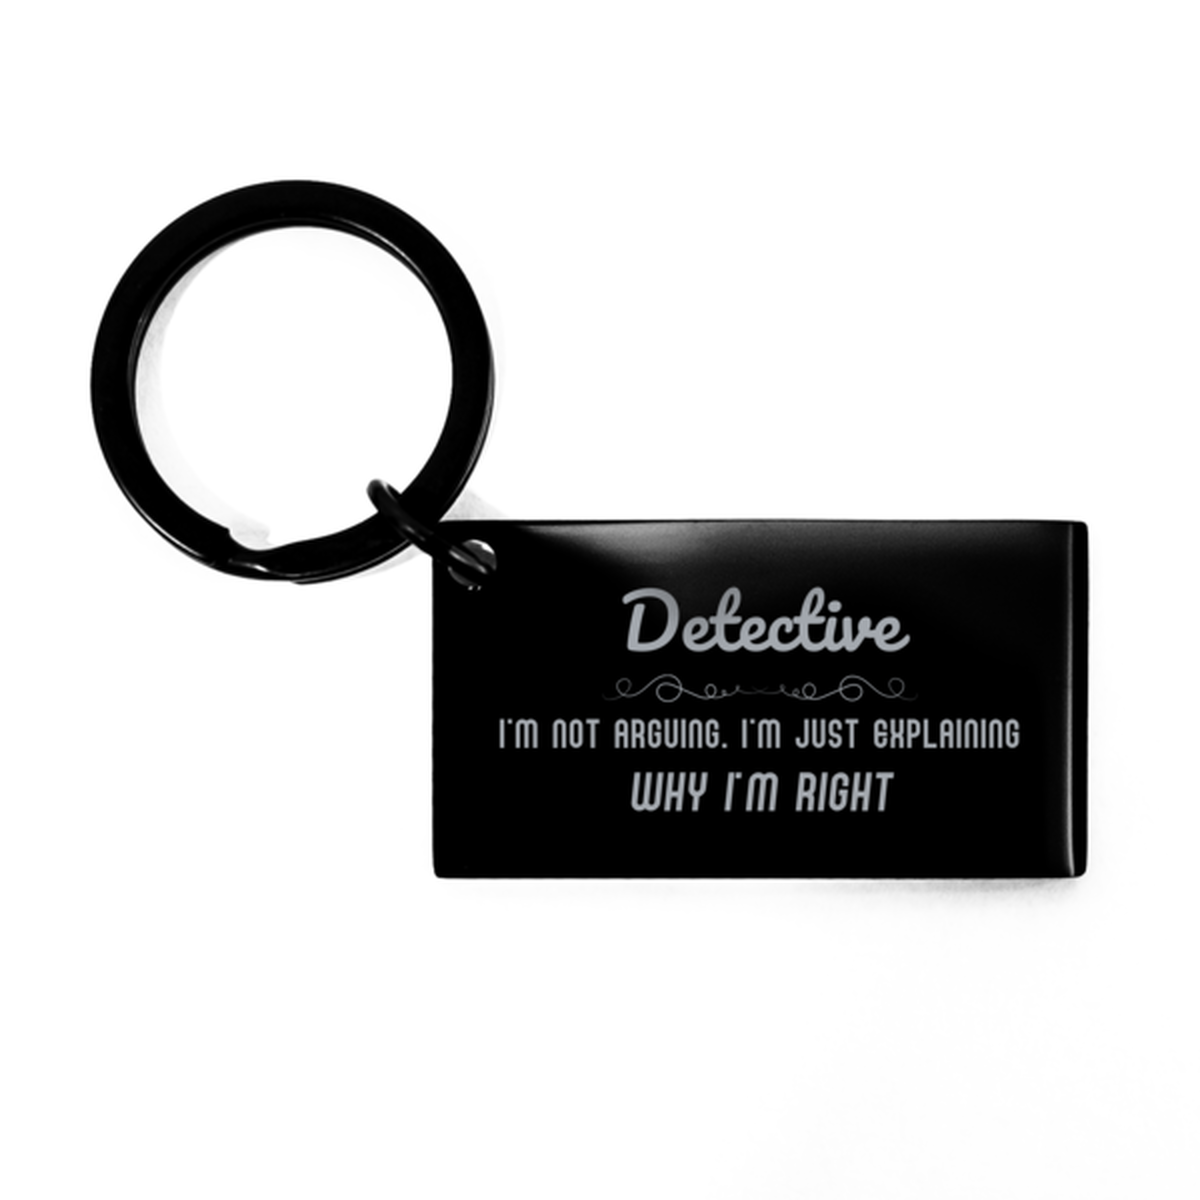 Detective I'm not Arguing. I'm Just Explaining Why I'm RIGHT Keychain, Funny Saying Quote Detective Gifts For Detective Graduation Birthday Christmas Gifts for Men Women Coworker